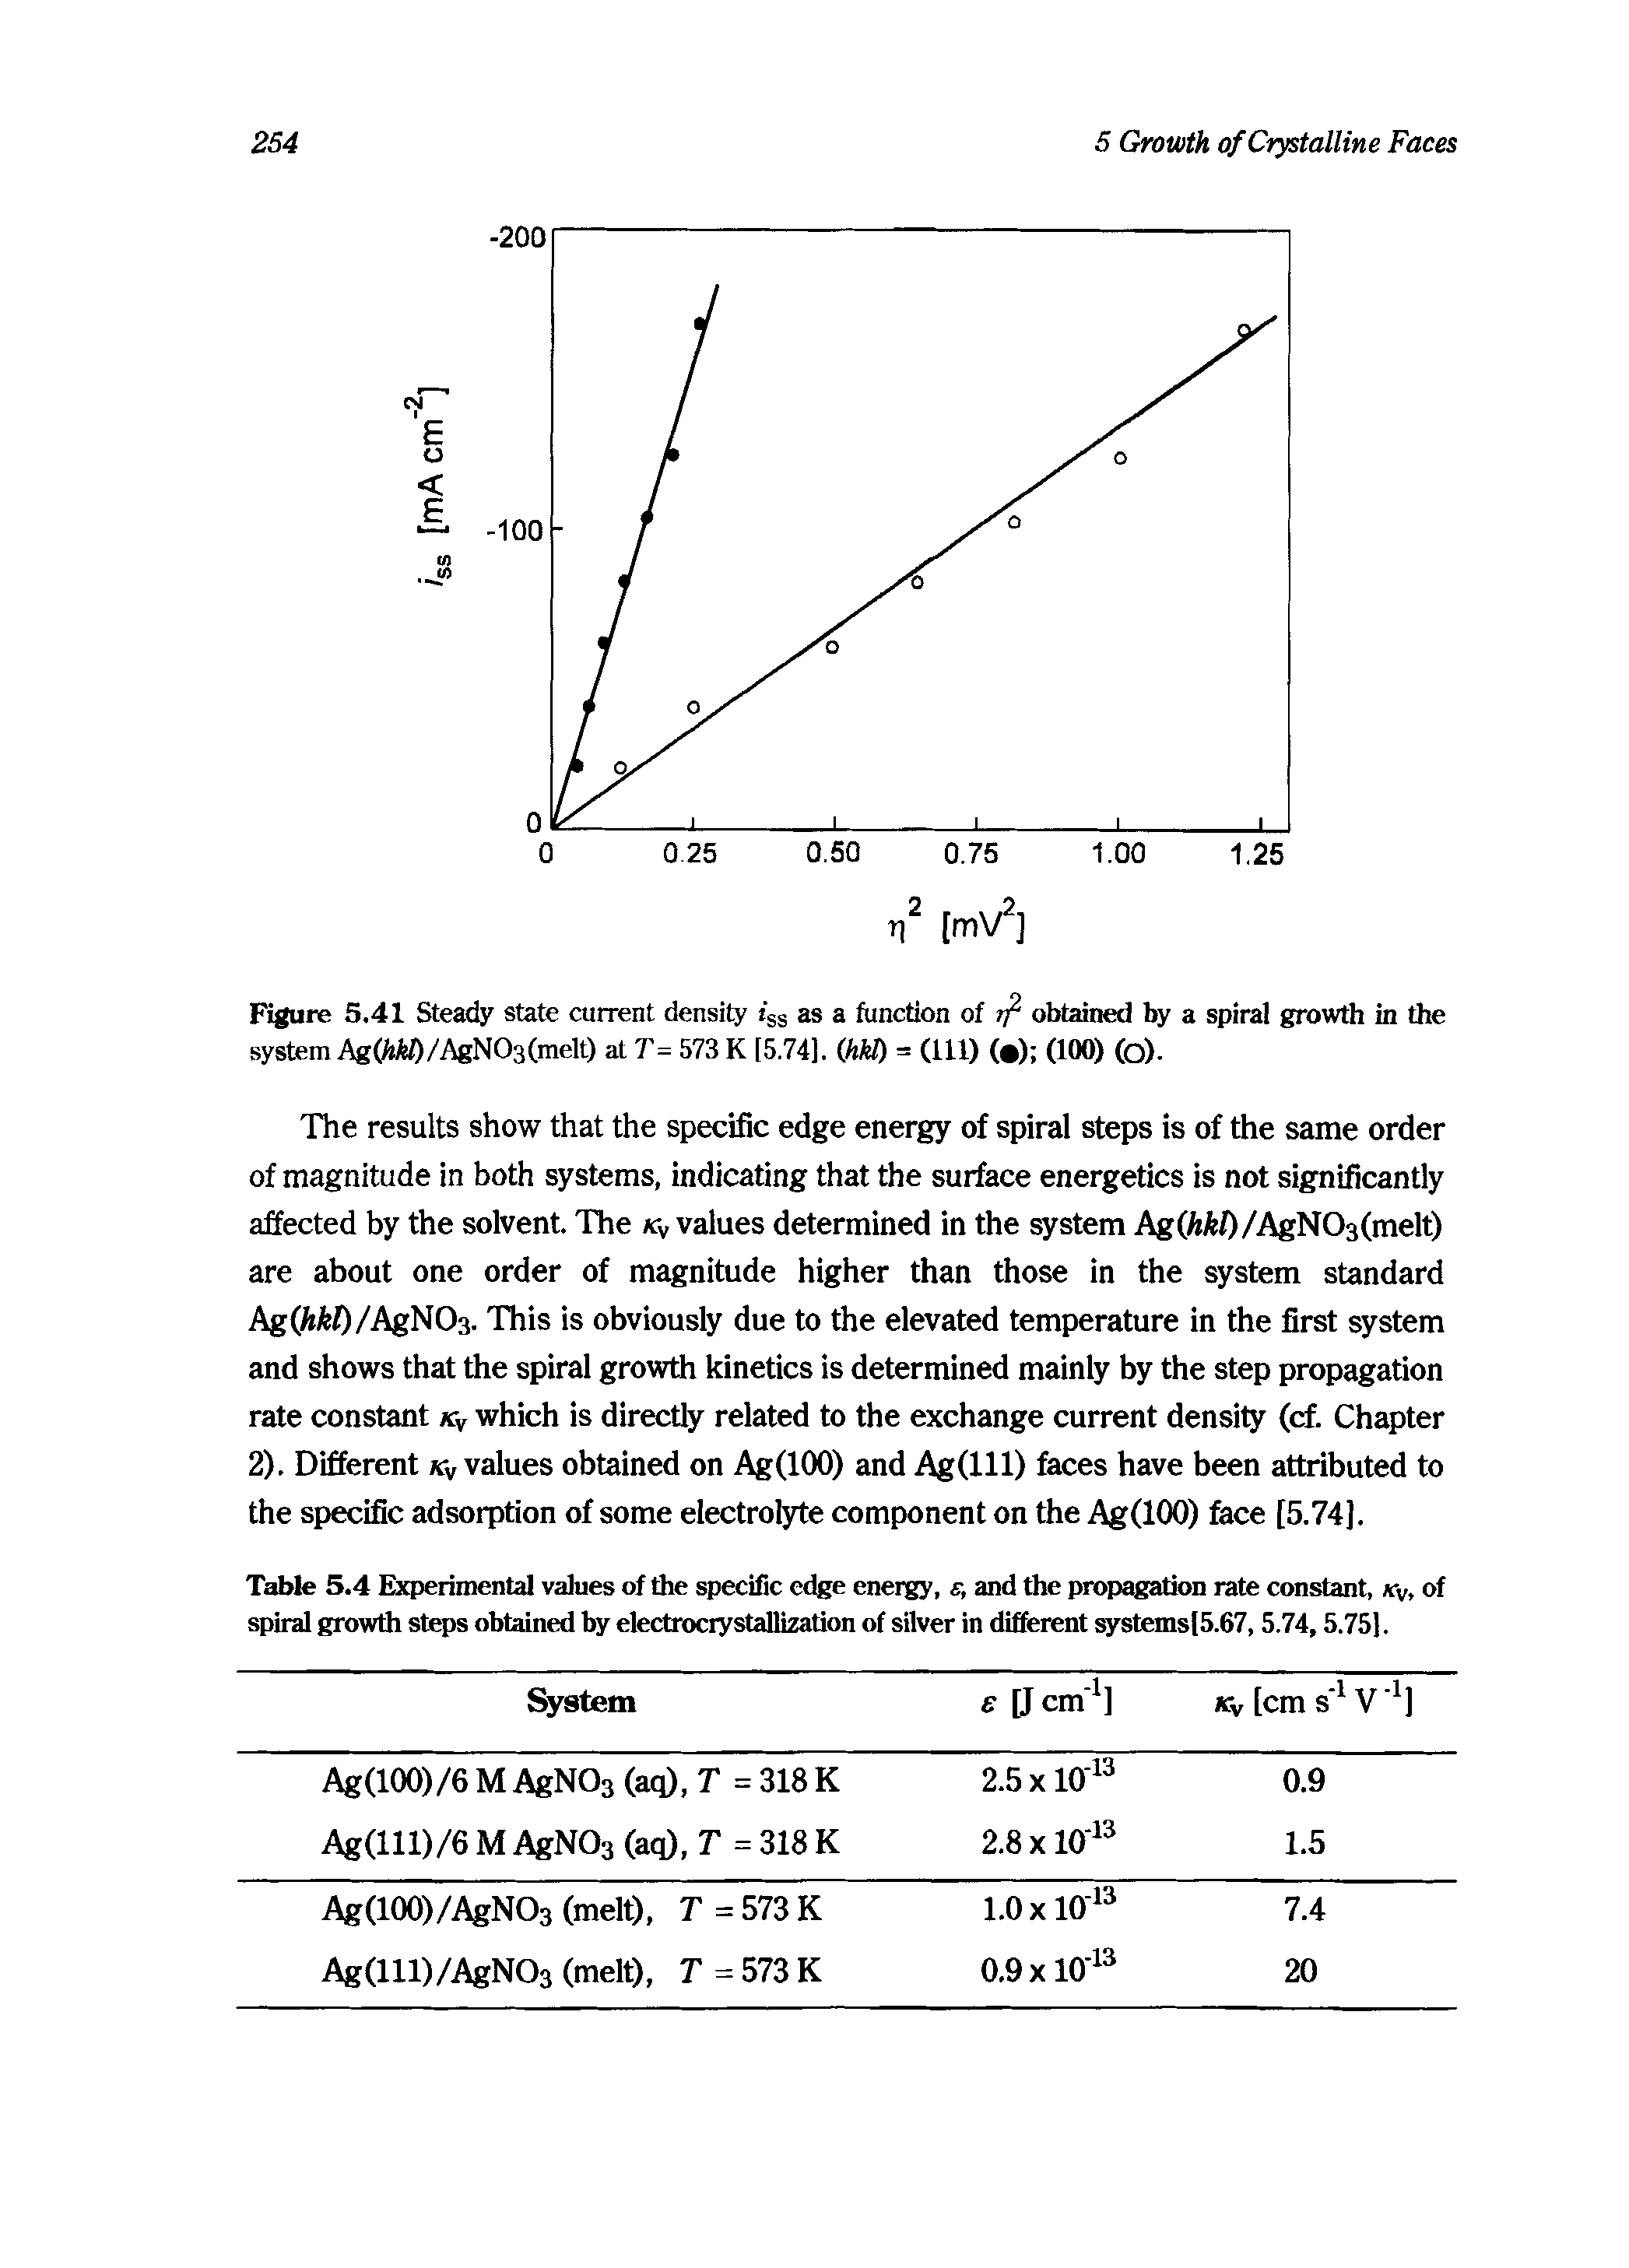 Table 5.4 Experimental values of the specific edge energy, e, and the propagation rate constant, v of spiral growth steps obtained by electrocrystallization of silver in different stemsl5.67,5.74,5.75].